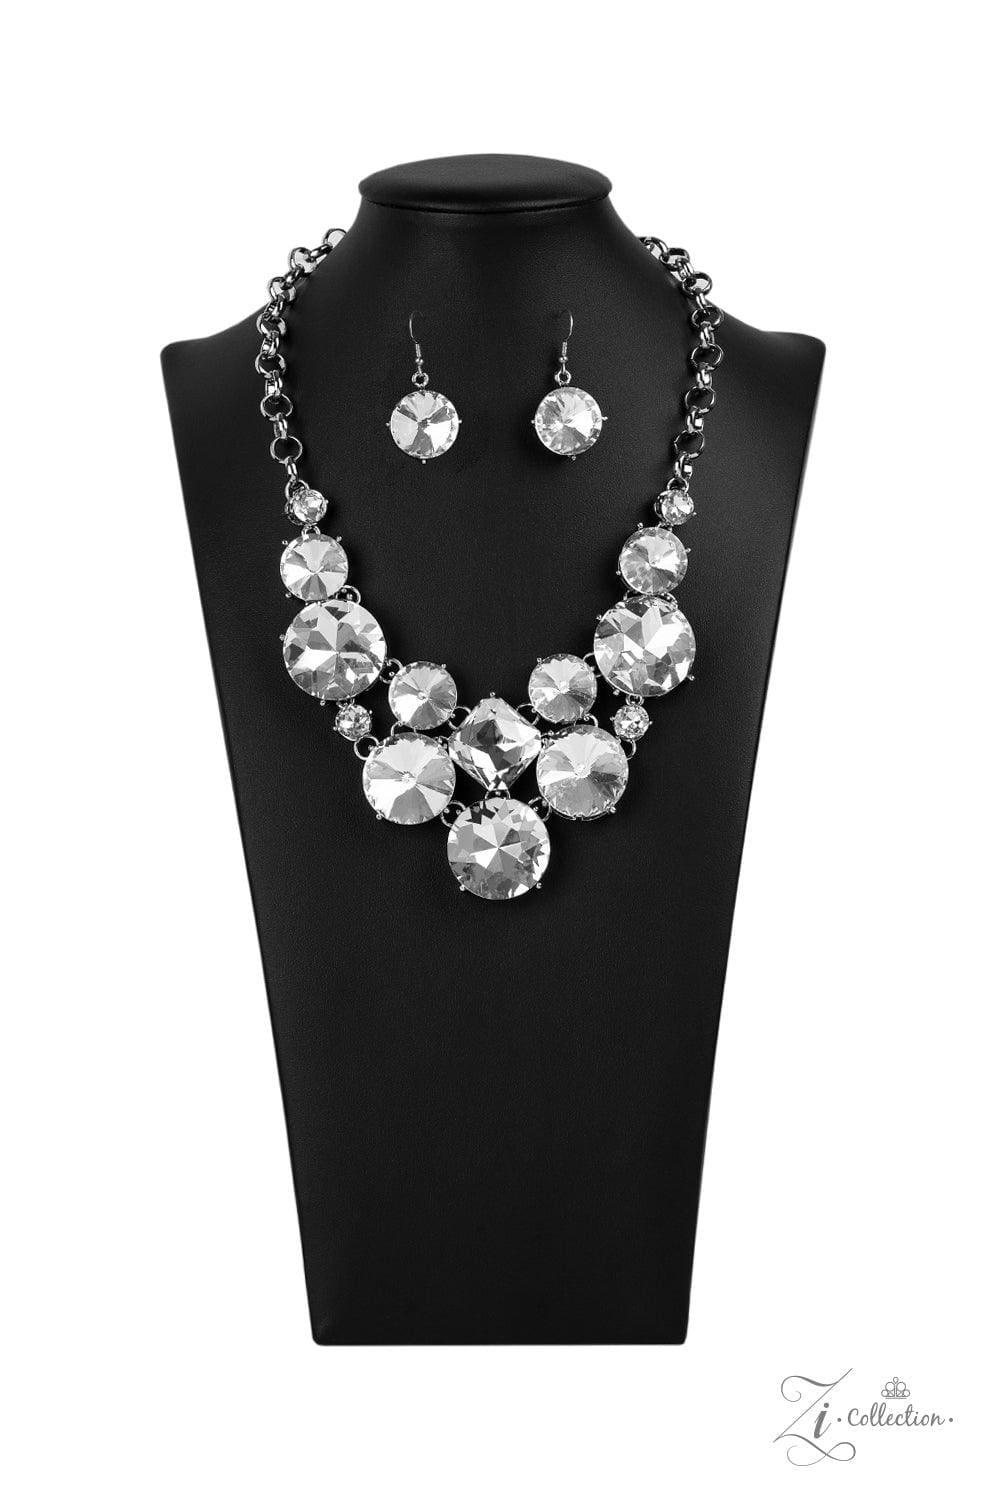 Paparazzi Accessories - Unpredictable - 2020 Zi Collection Necklace - Bling by JessieK